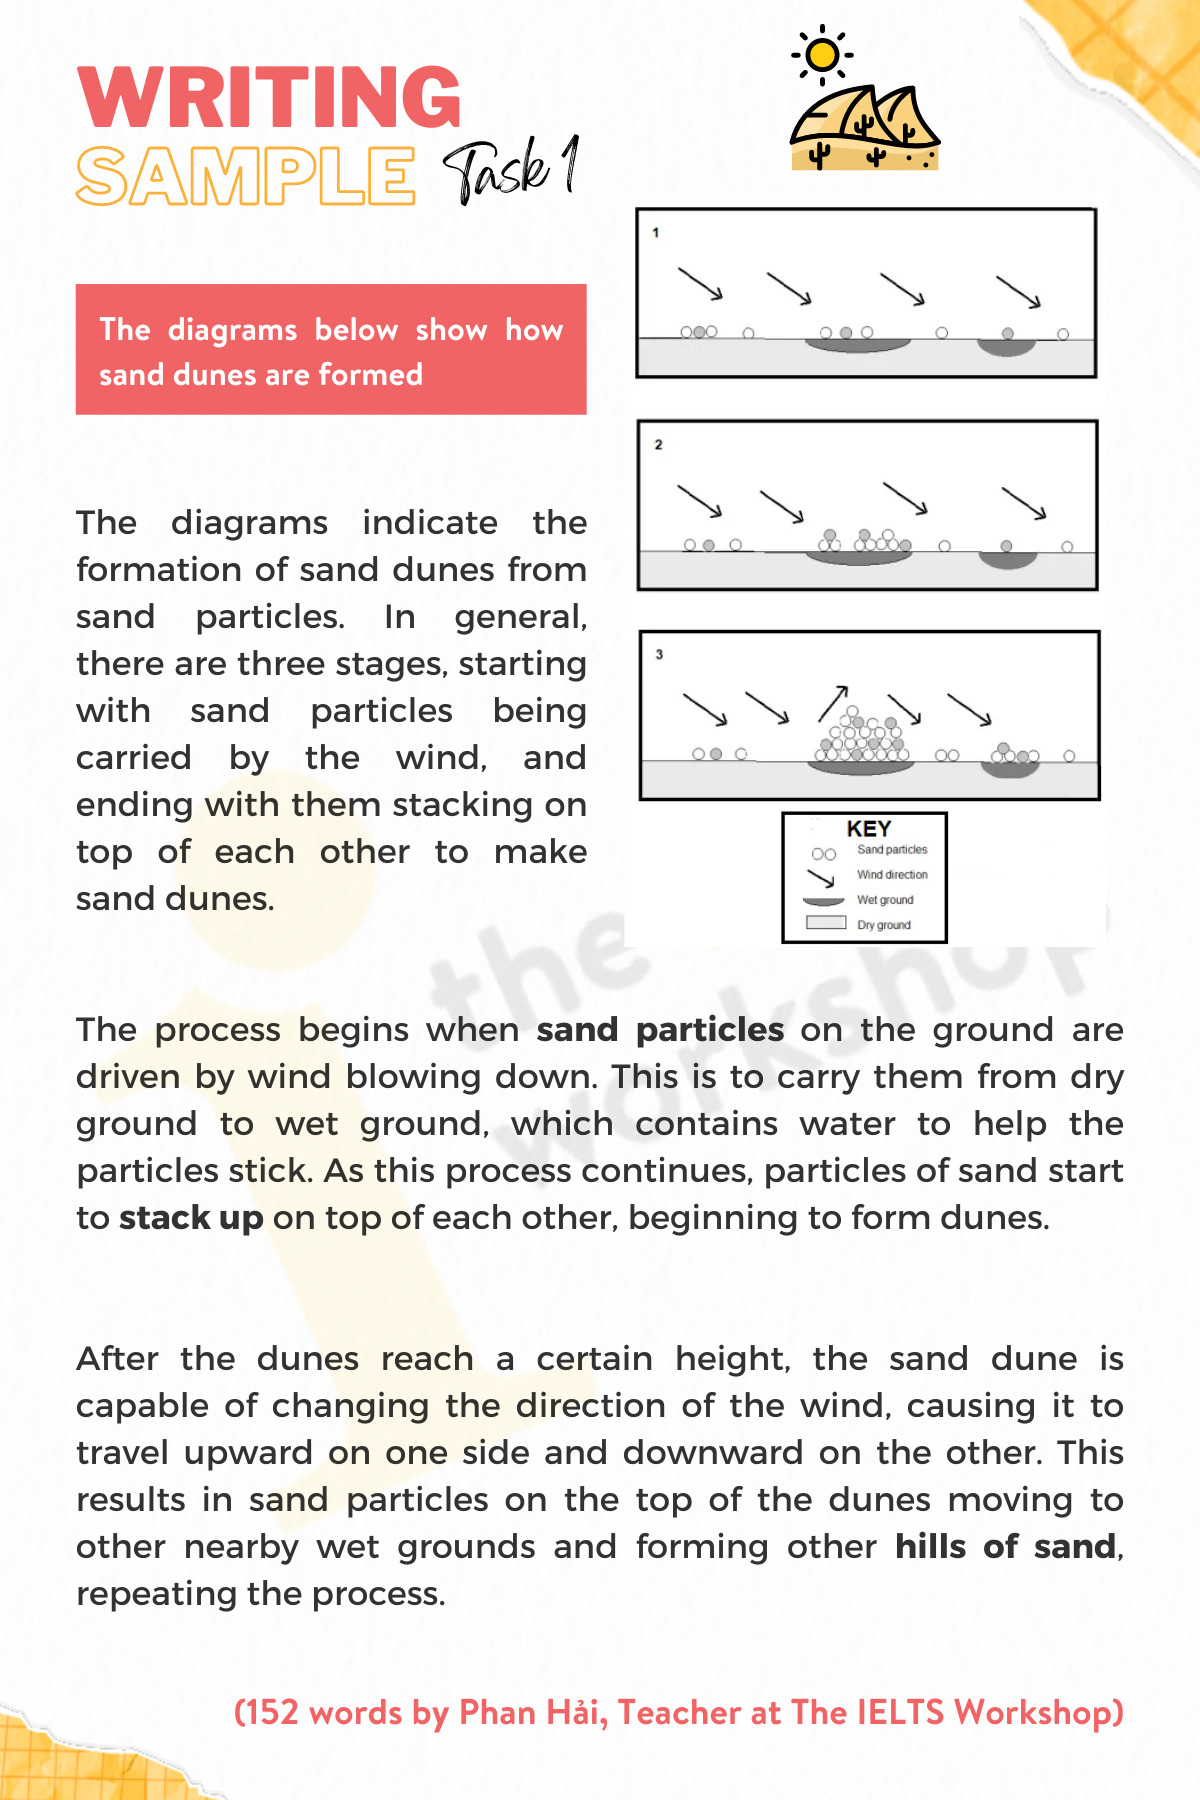 The diagrams below show how sand dunes are formed